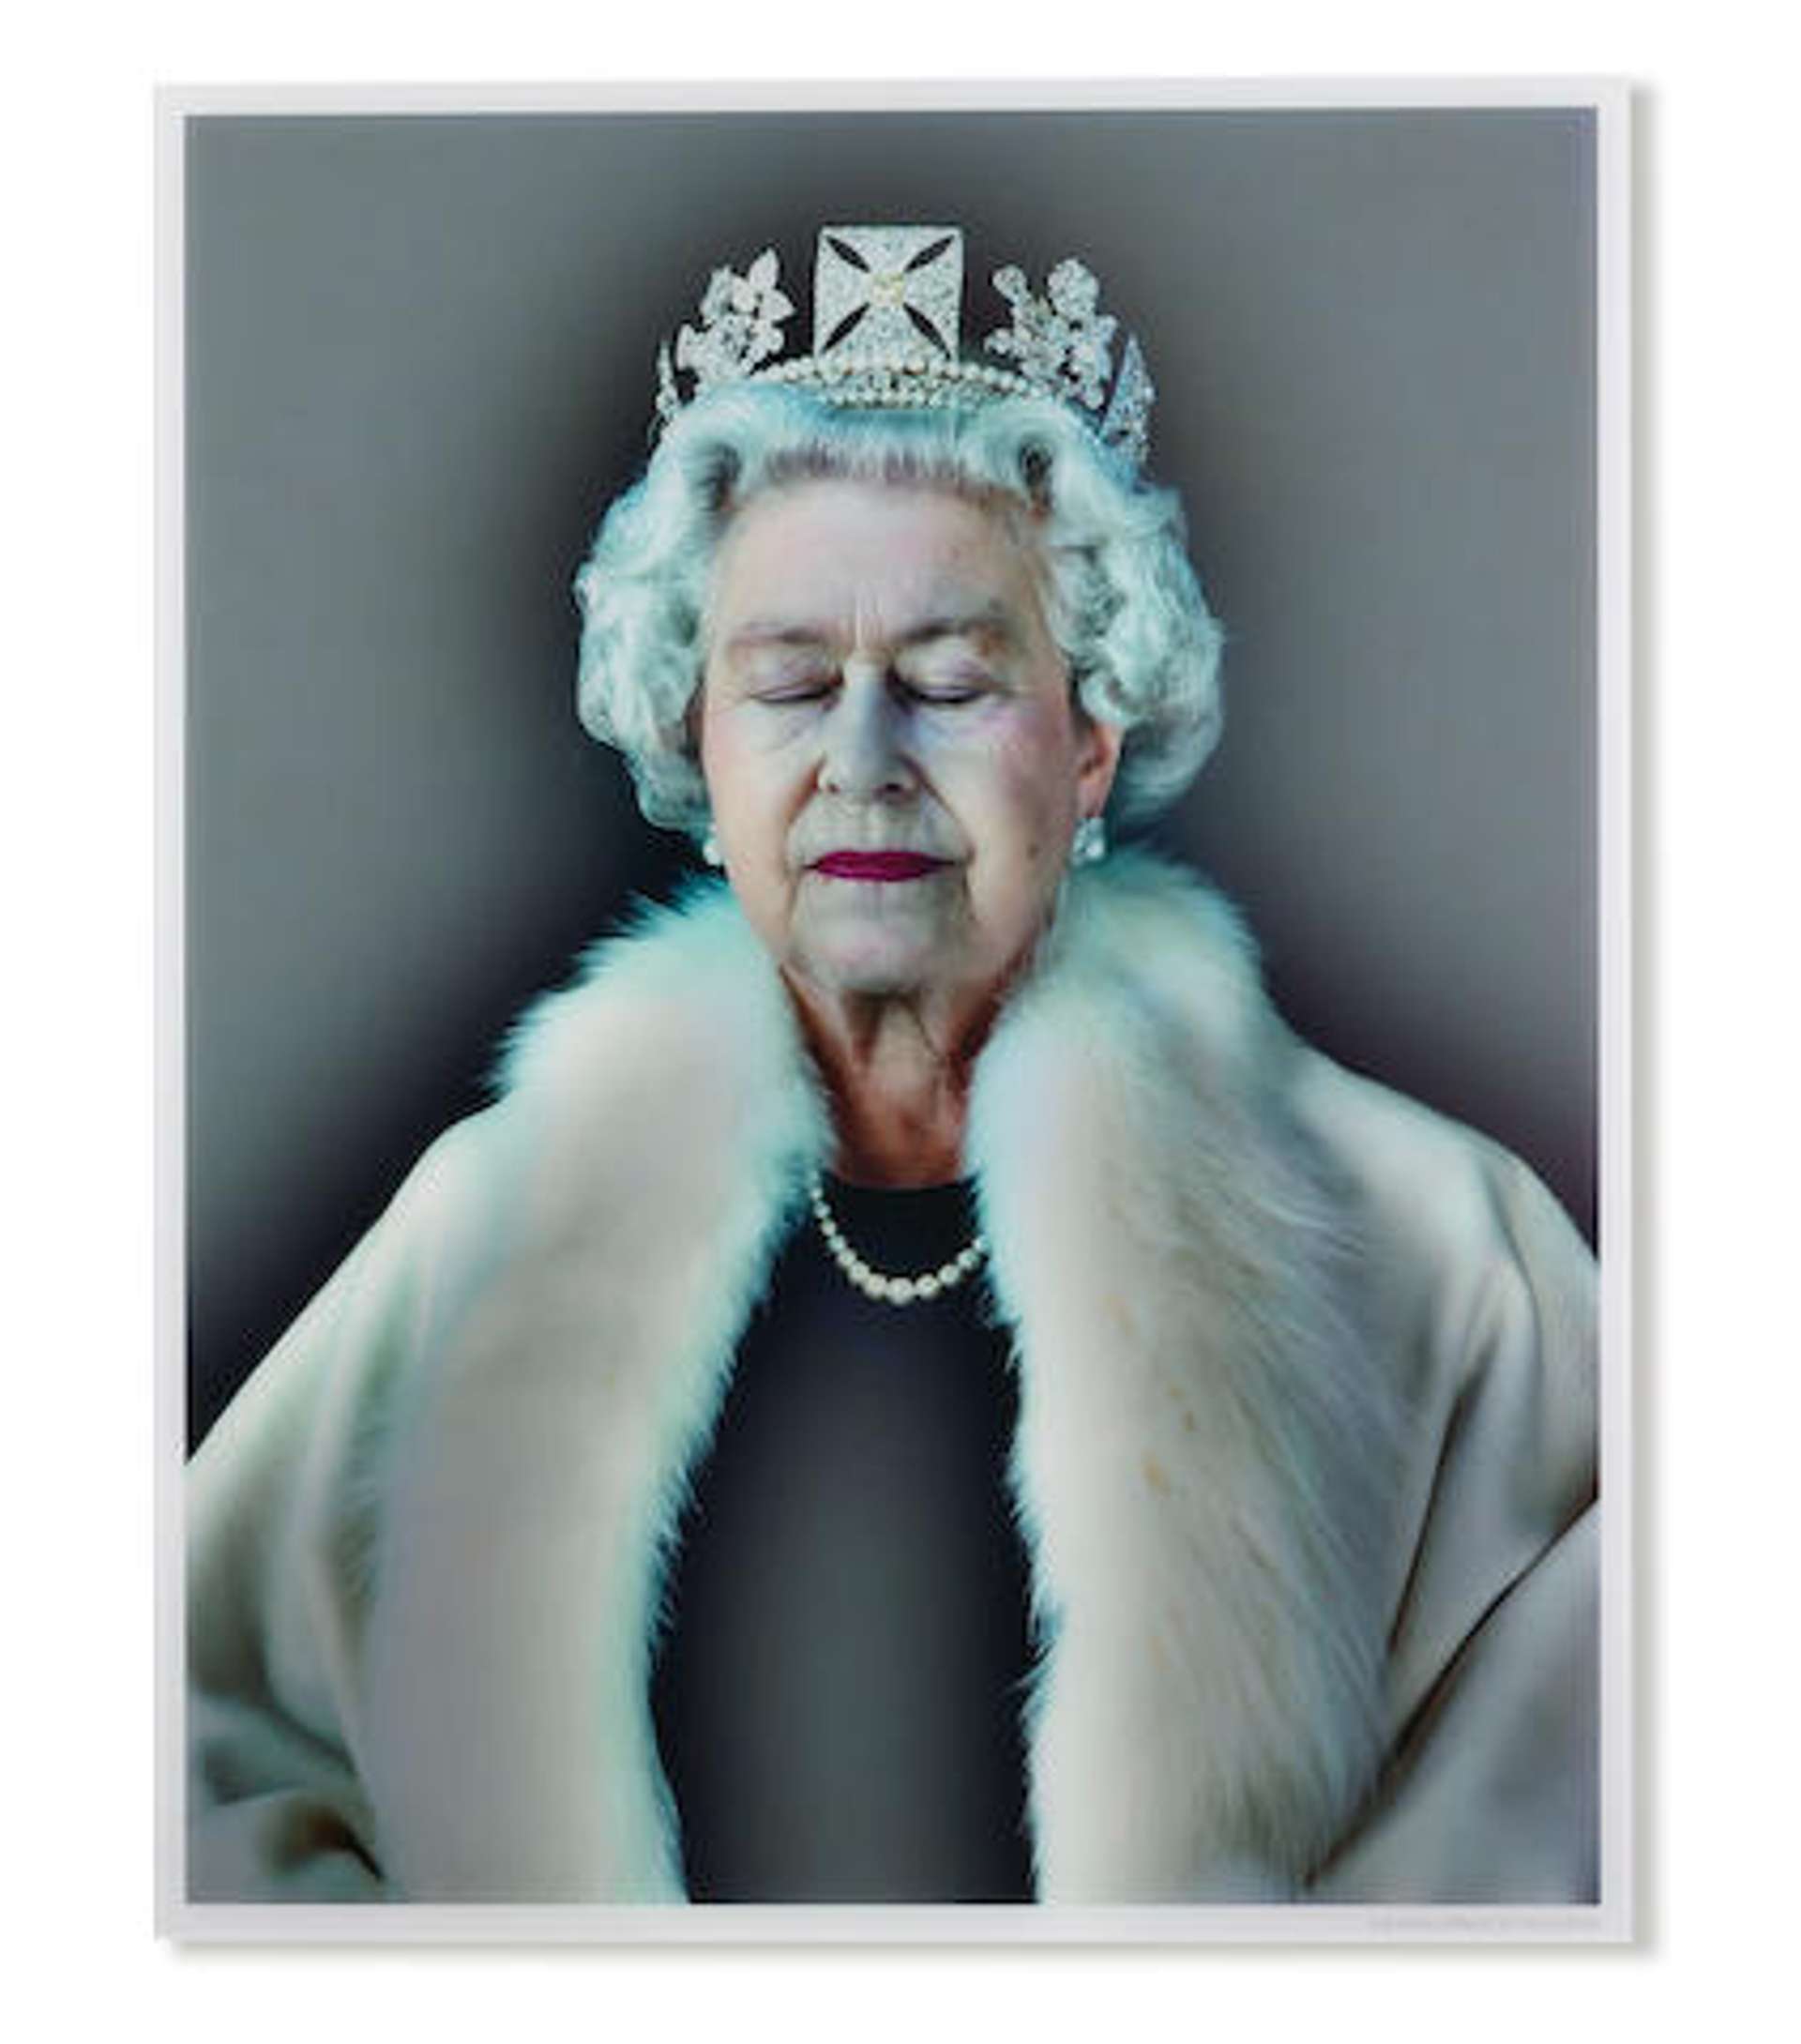 A lightbox portrait Queen Elizabeth II. She has her eyes closed and wears a fur-lined robe with a crown on her head.